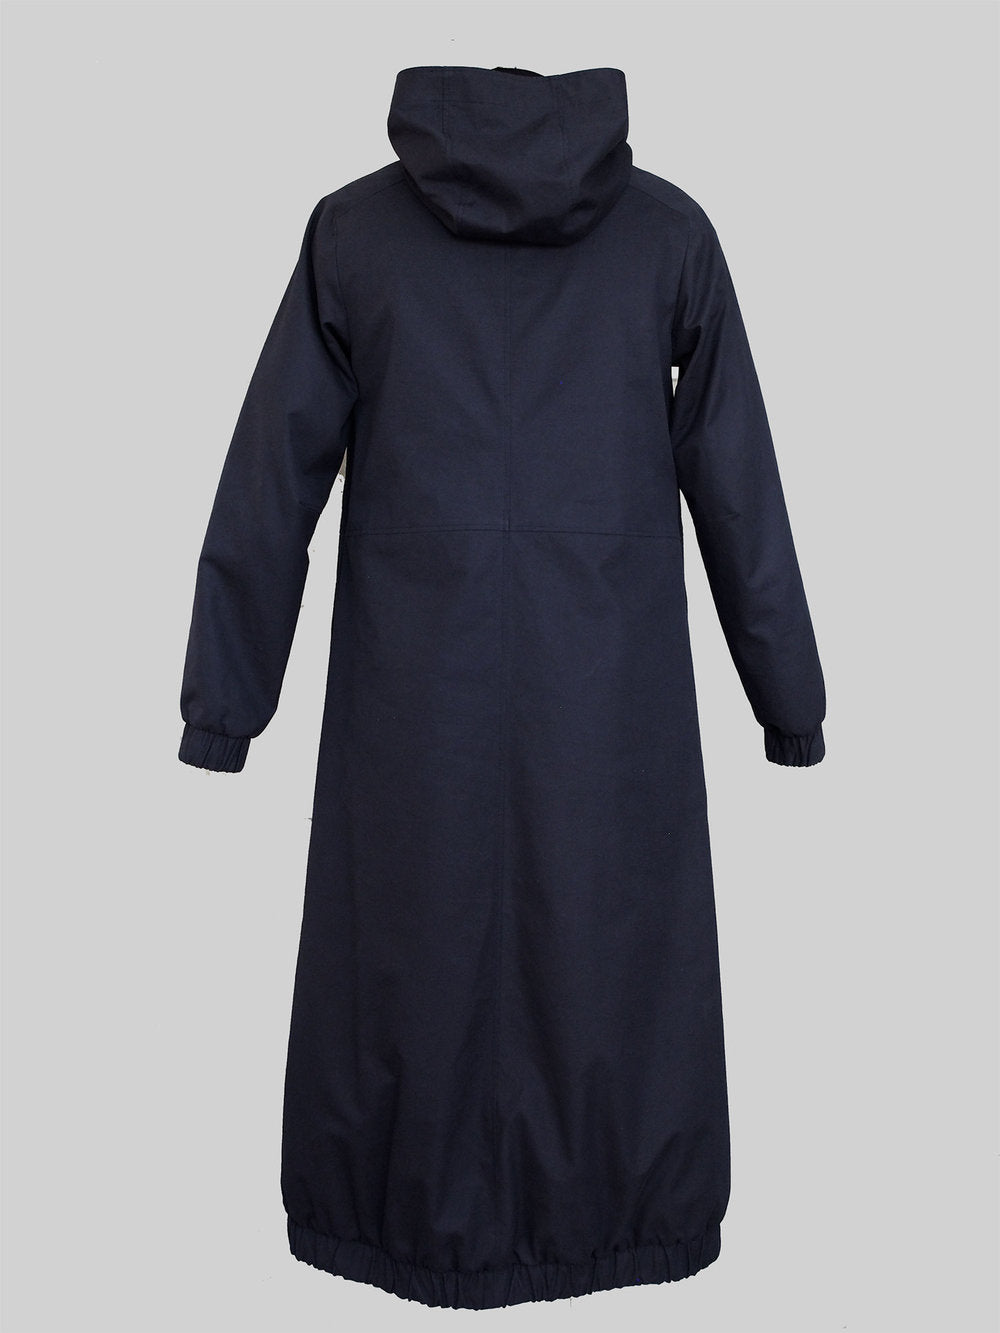 The Assembly Line Hoodie Dress